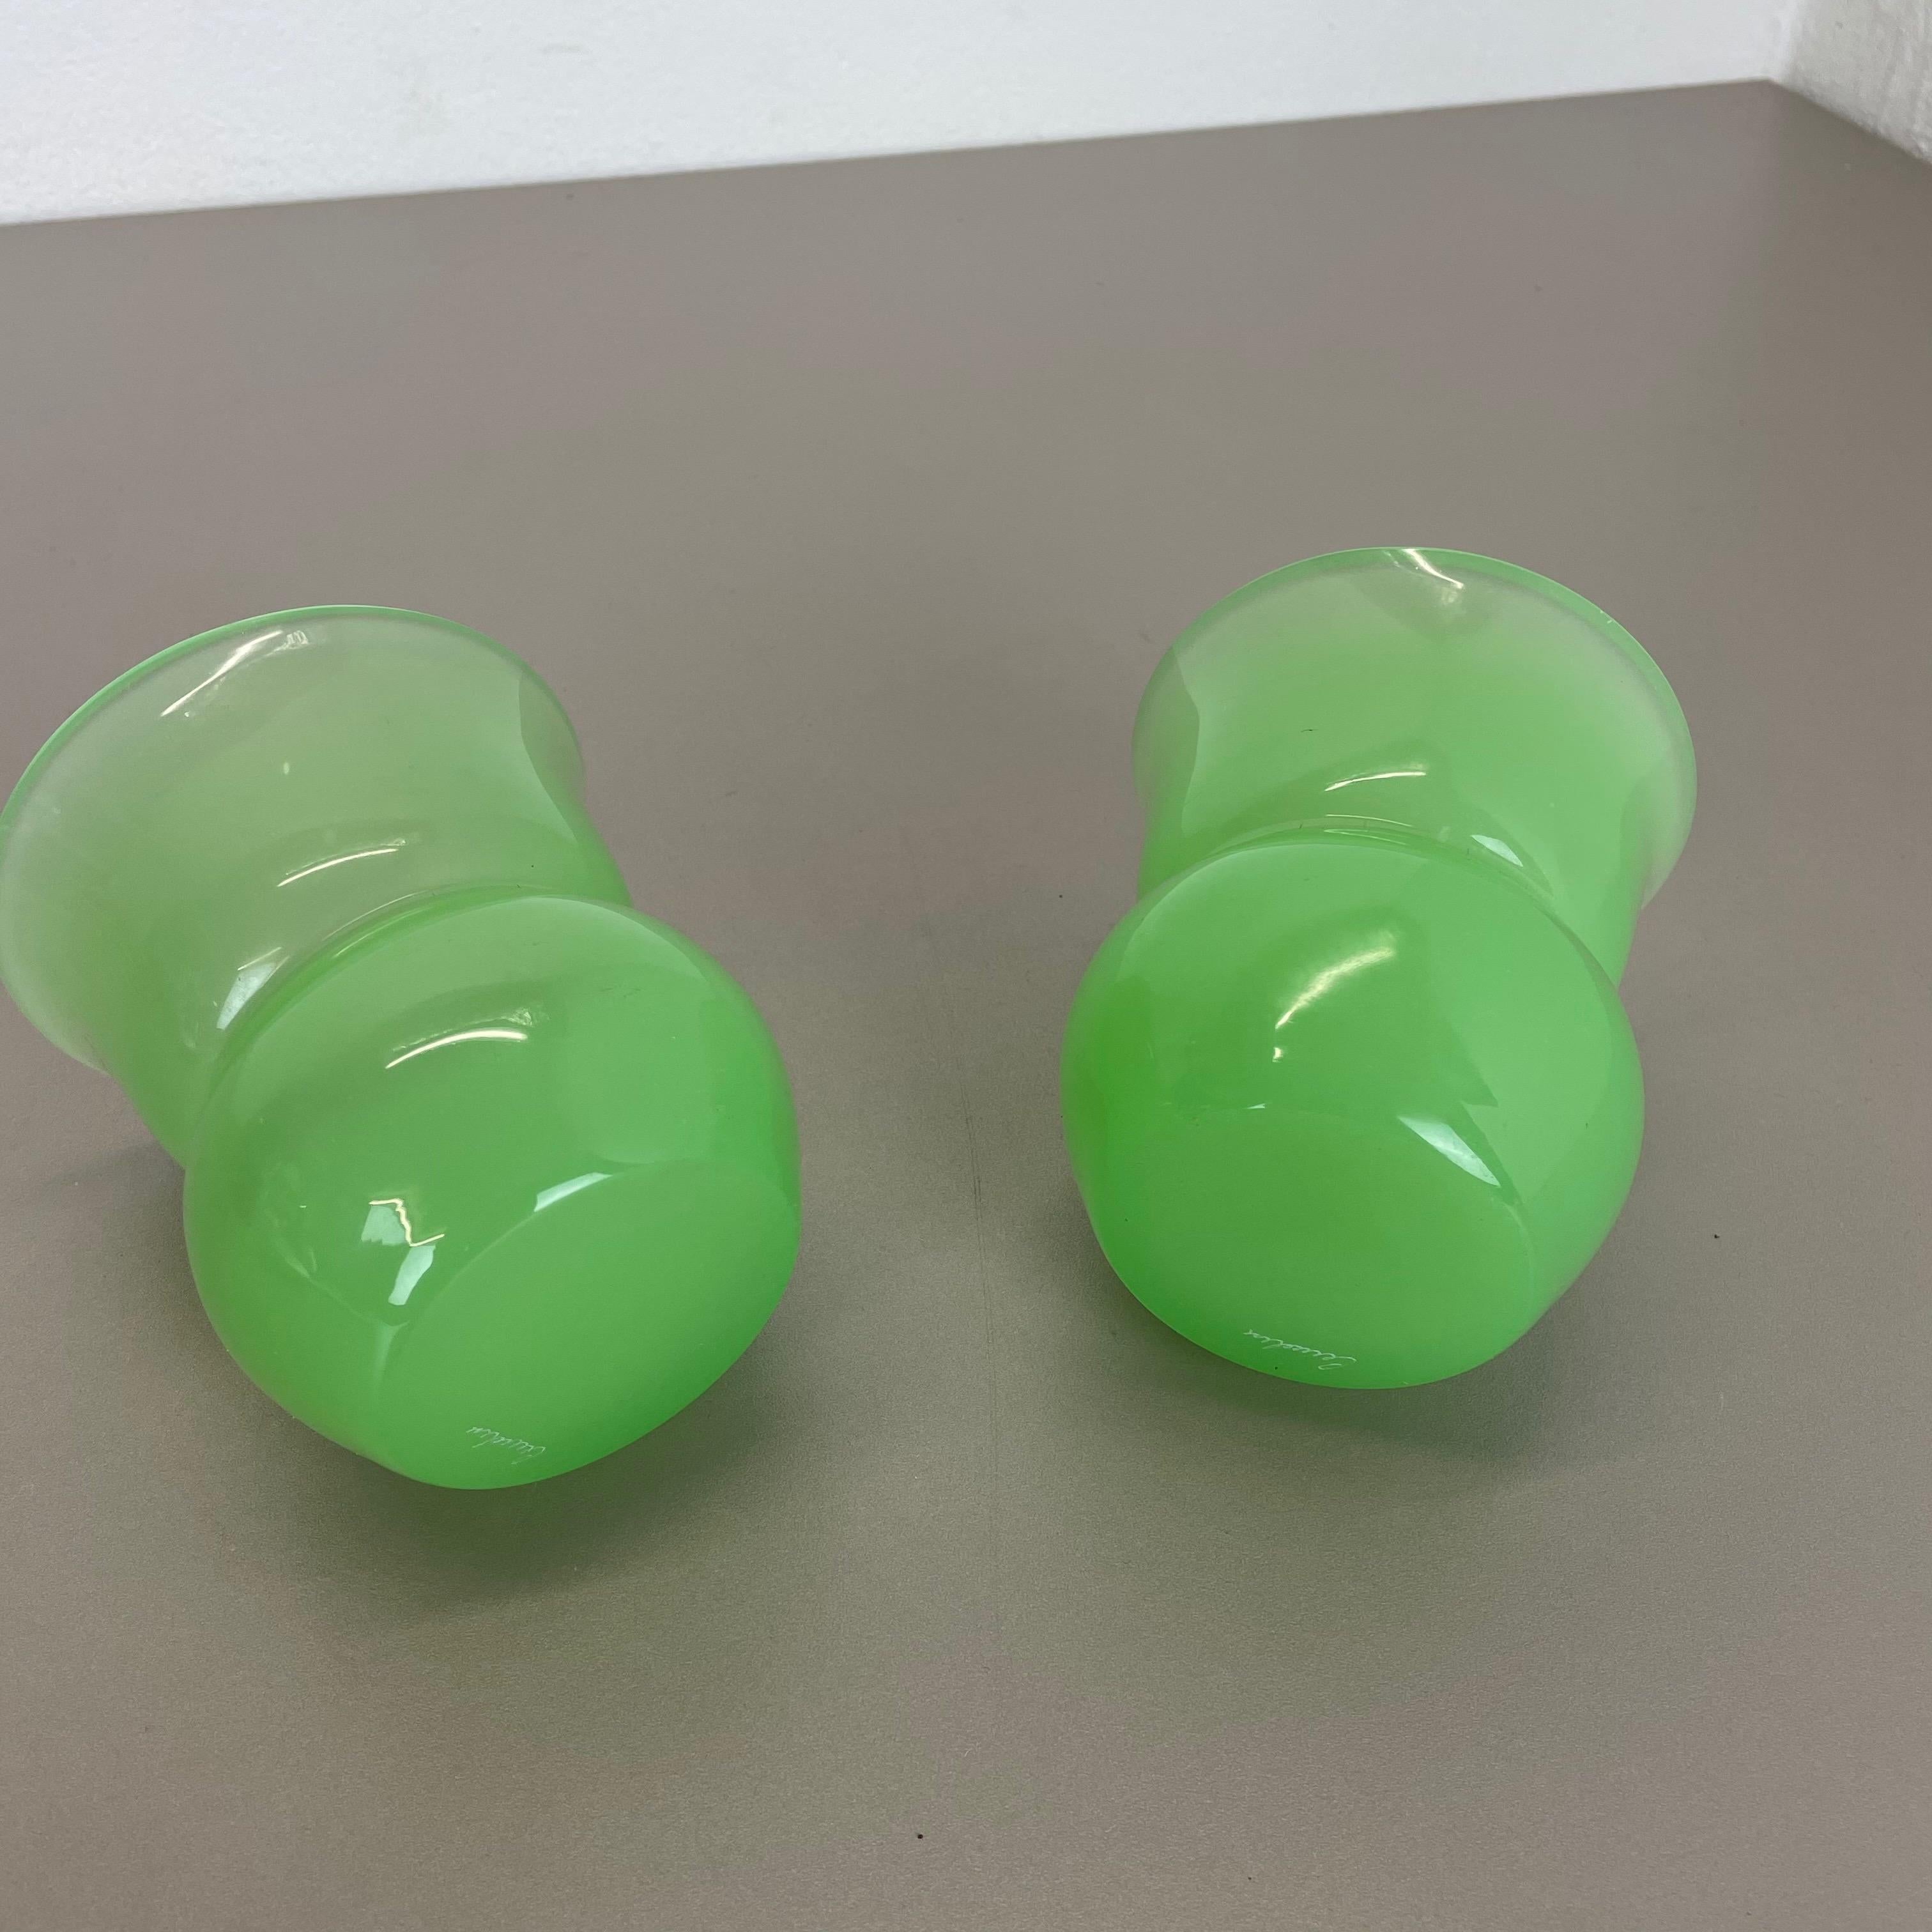 Set of 2 Green New Old Stock Murano Opaline Glass Vases by Gino Cenedese, 1960s For Sale 3